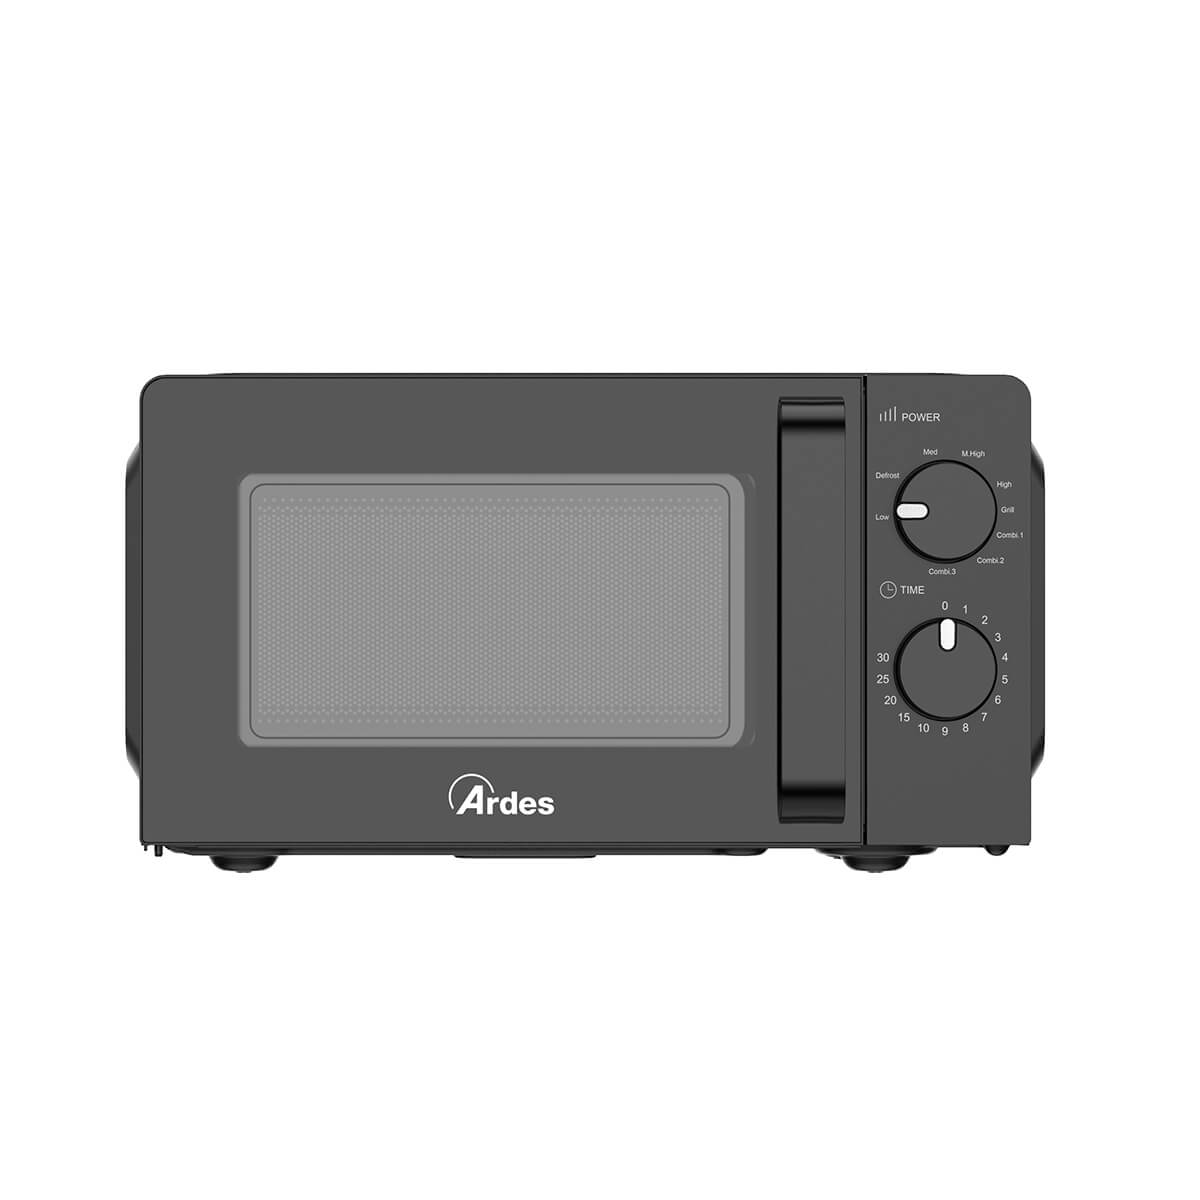 AR6520G - WAVE G - 20L MICROEAVE OVEN WITH GRILL - Ardes